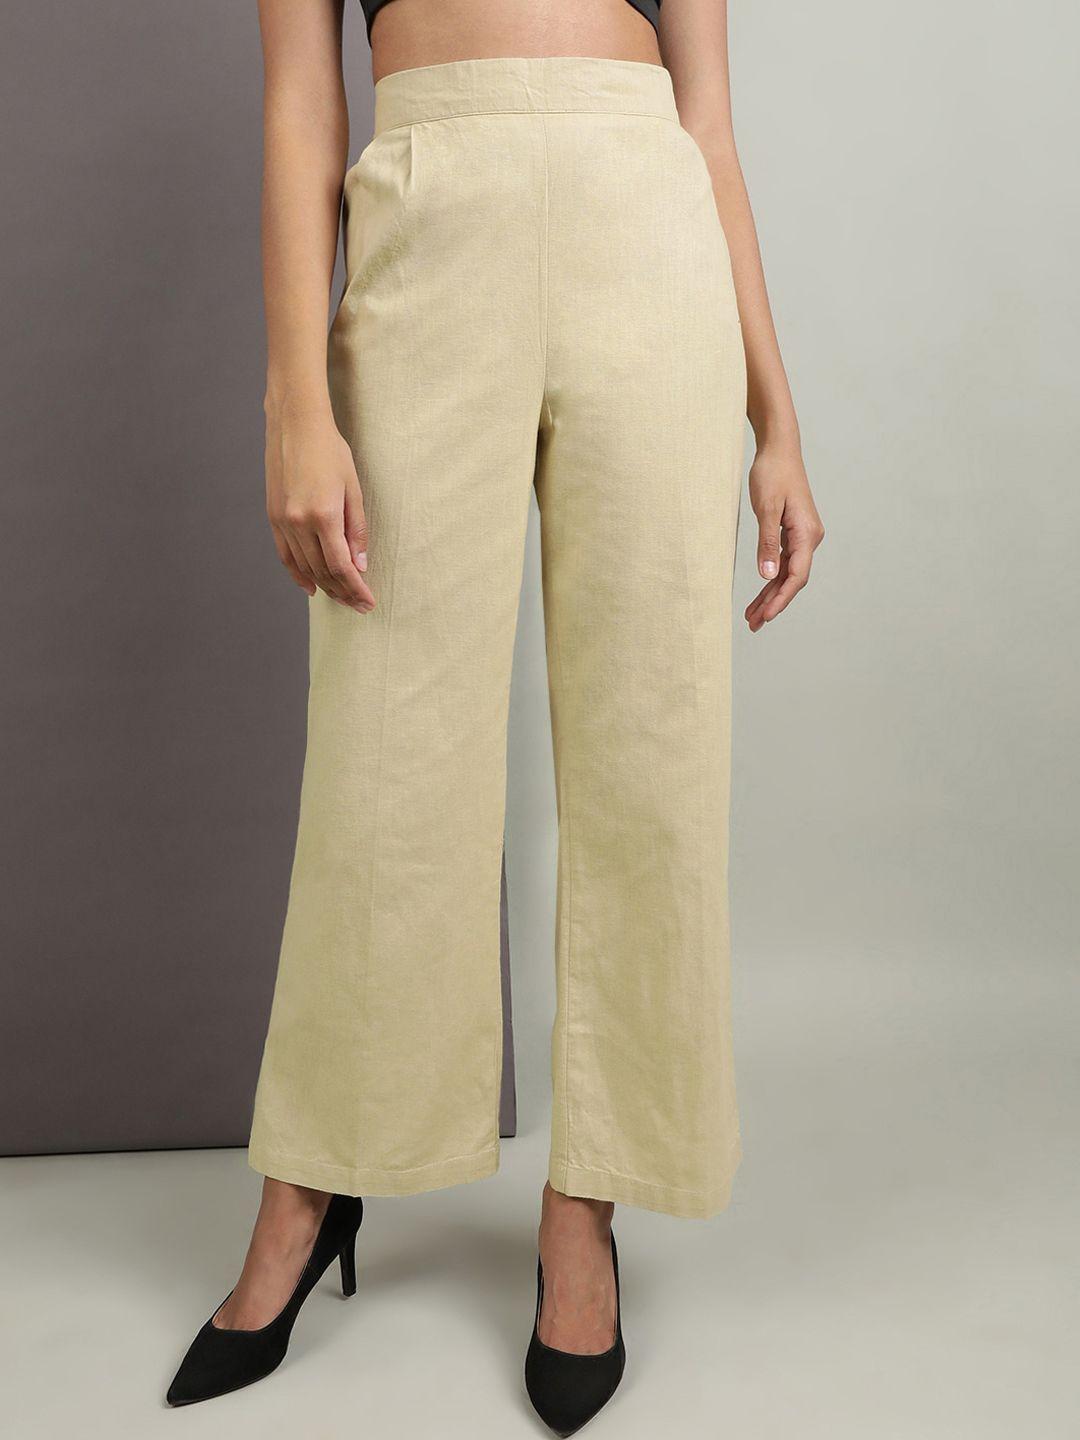 freehand-women-cotton-high-rise-flared-flat-front-plain-parallel-trousers